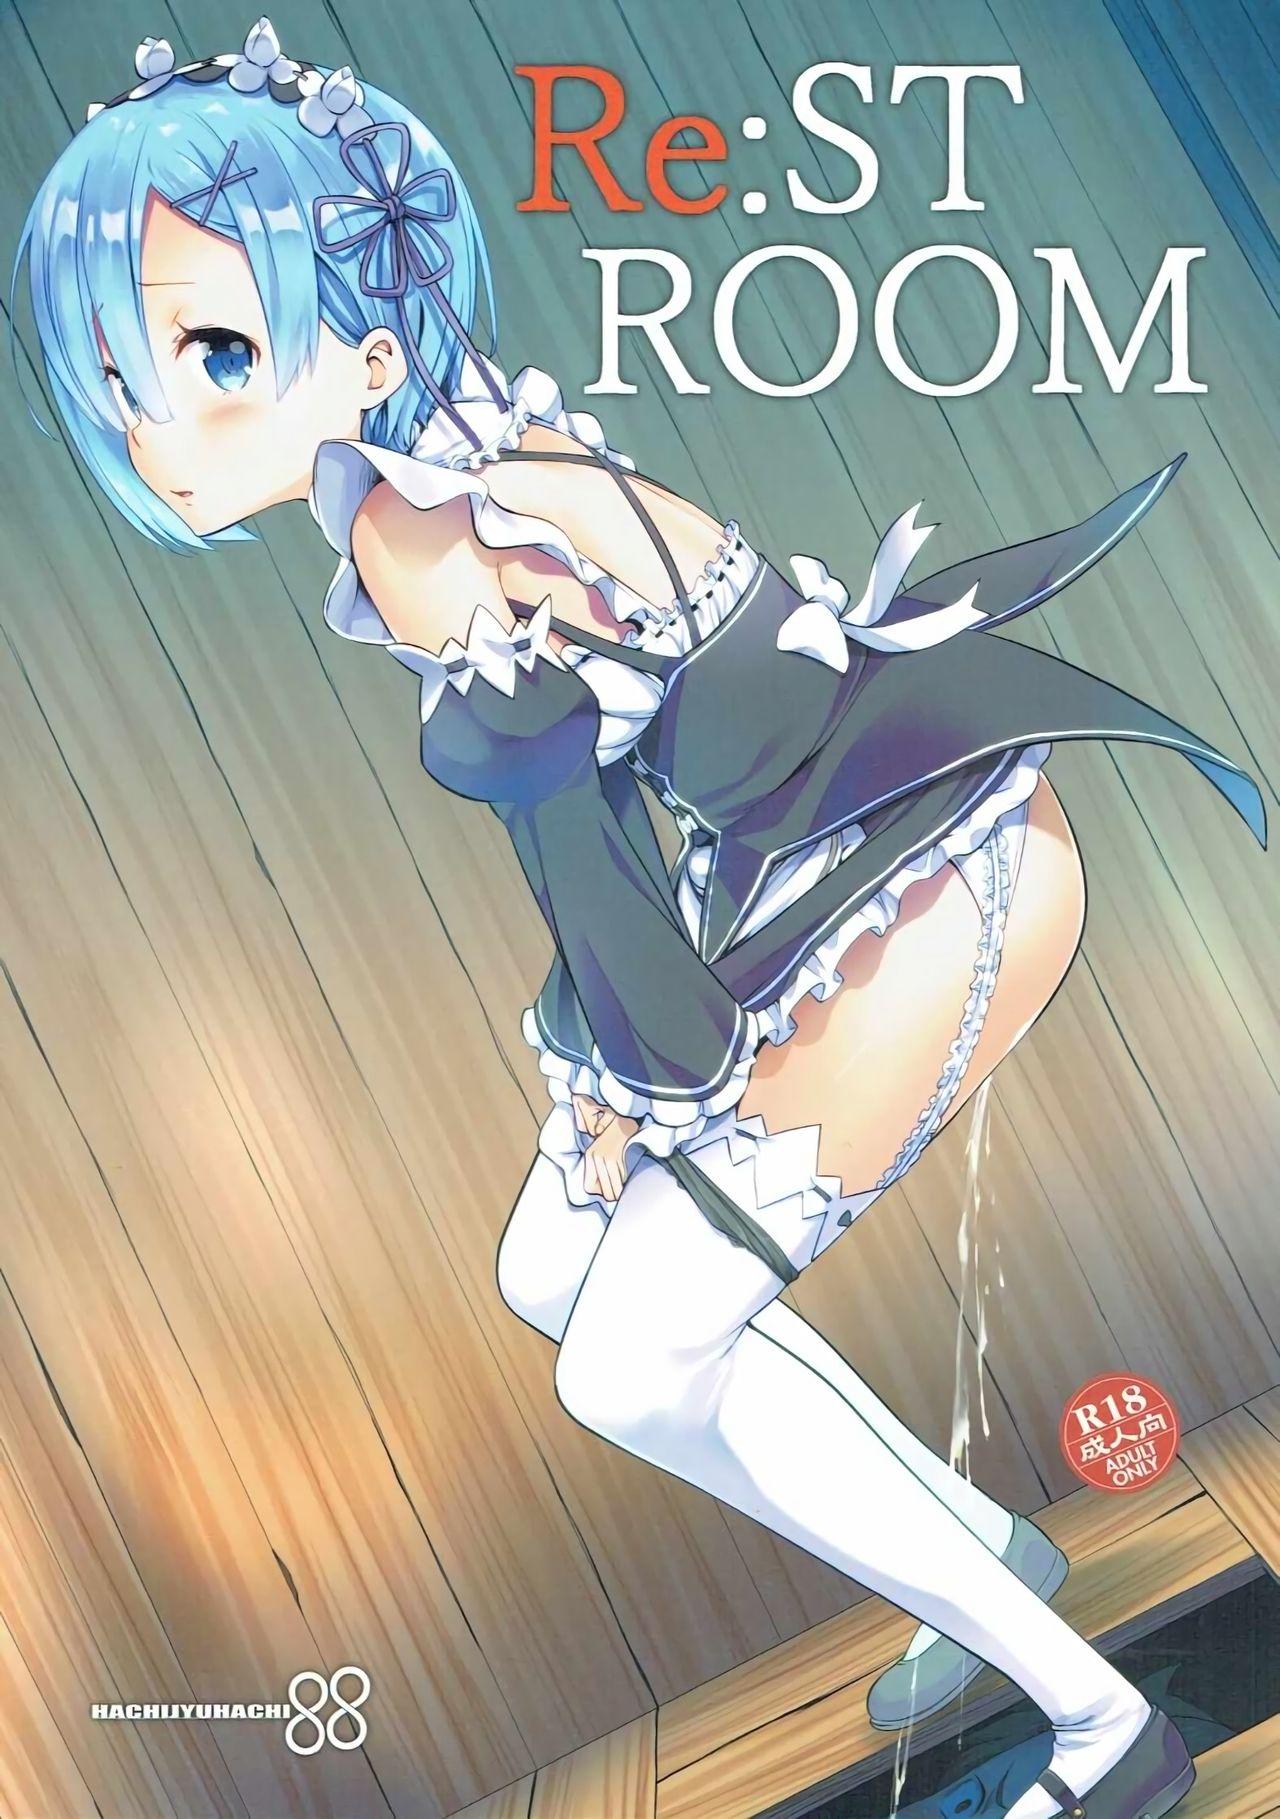 RE:ST ROOM 0